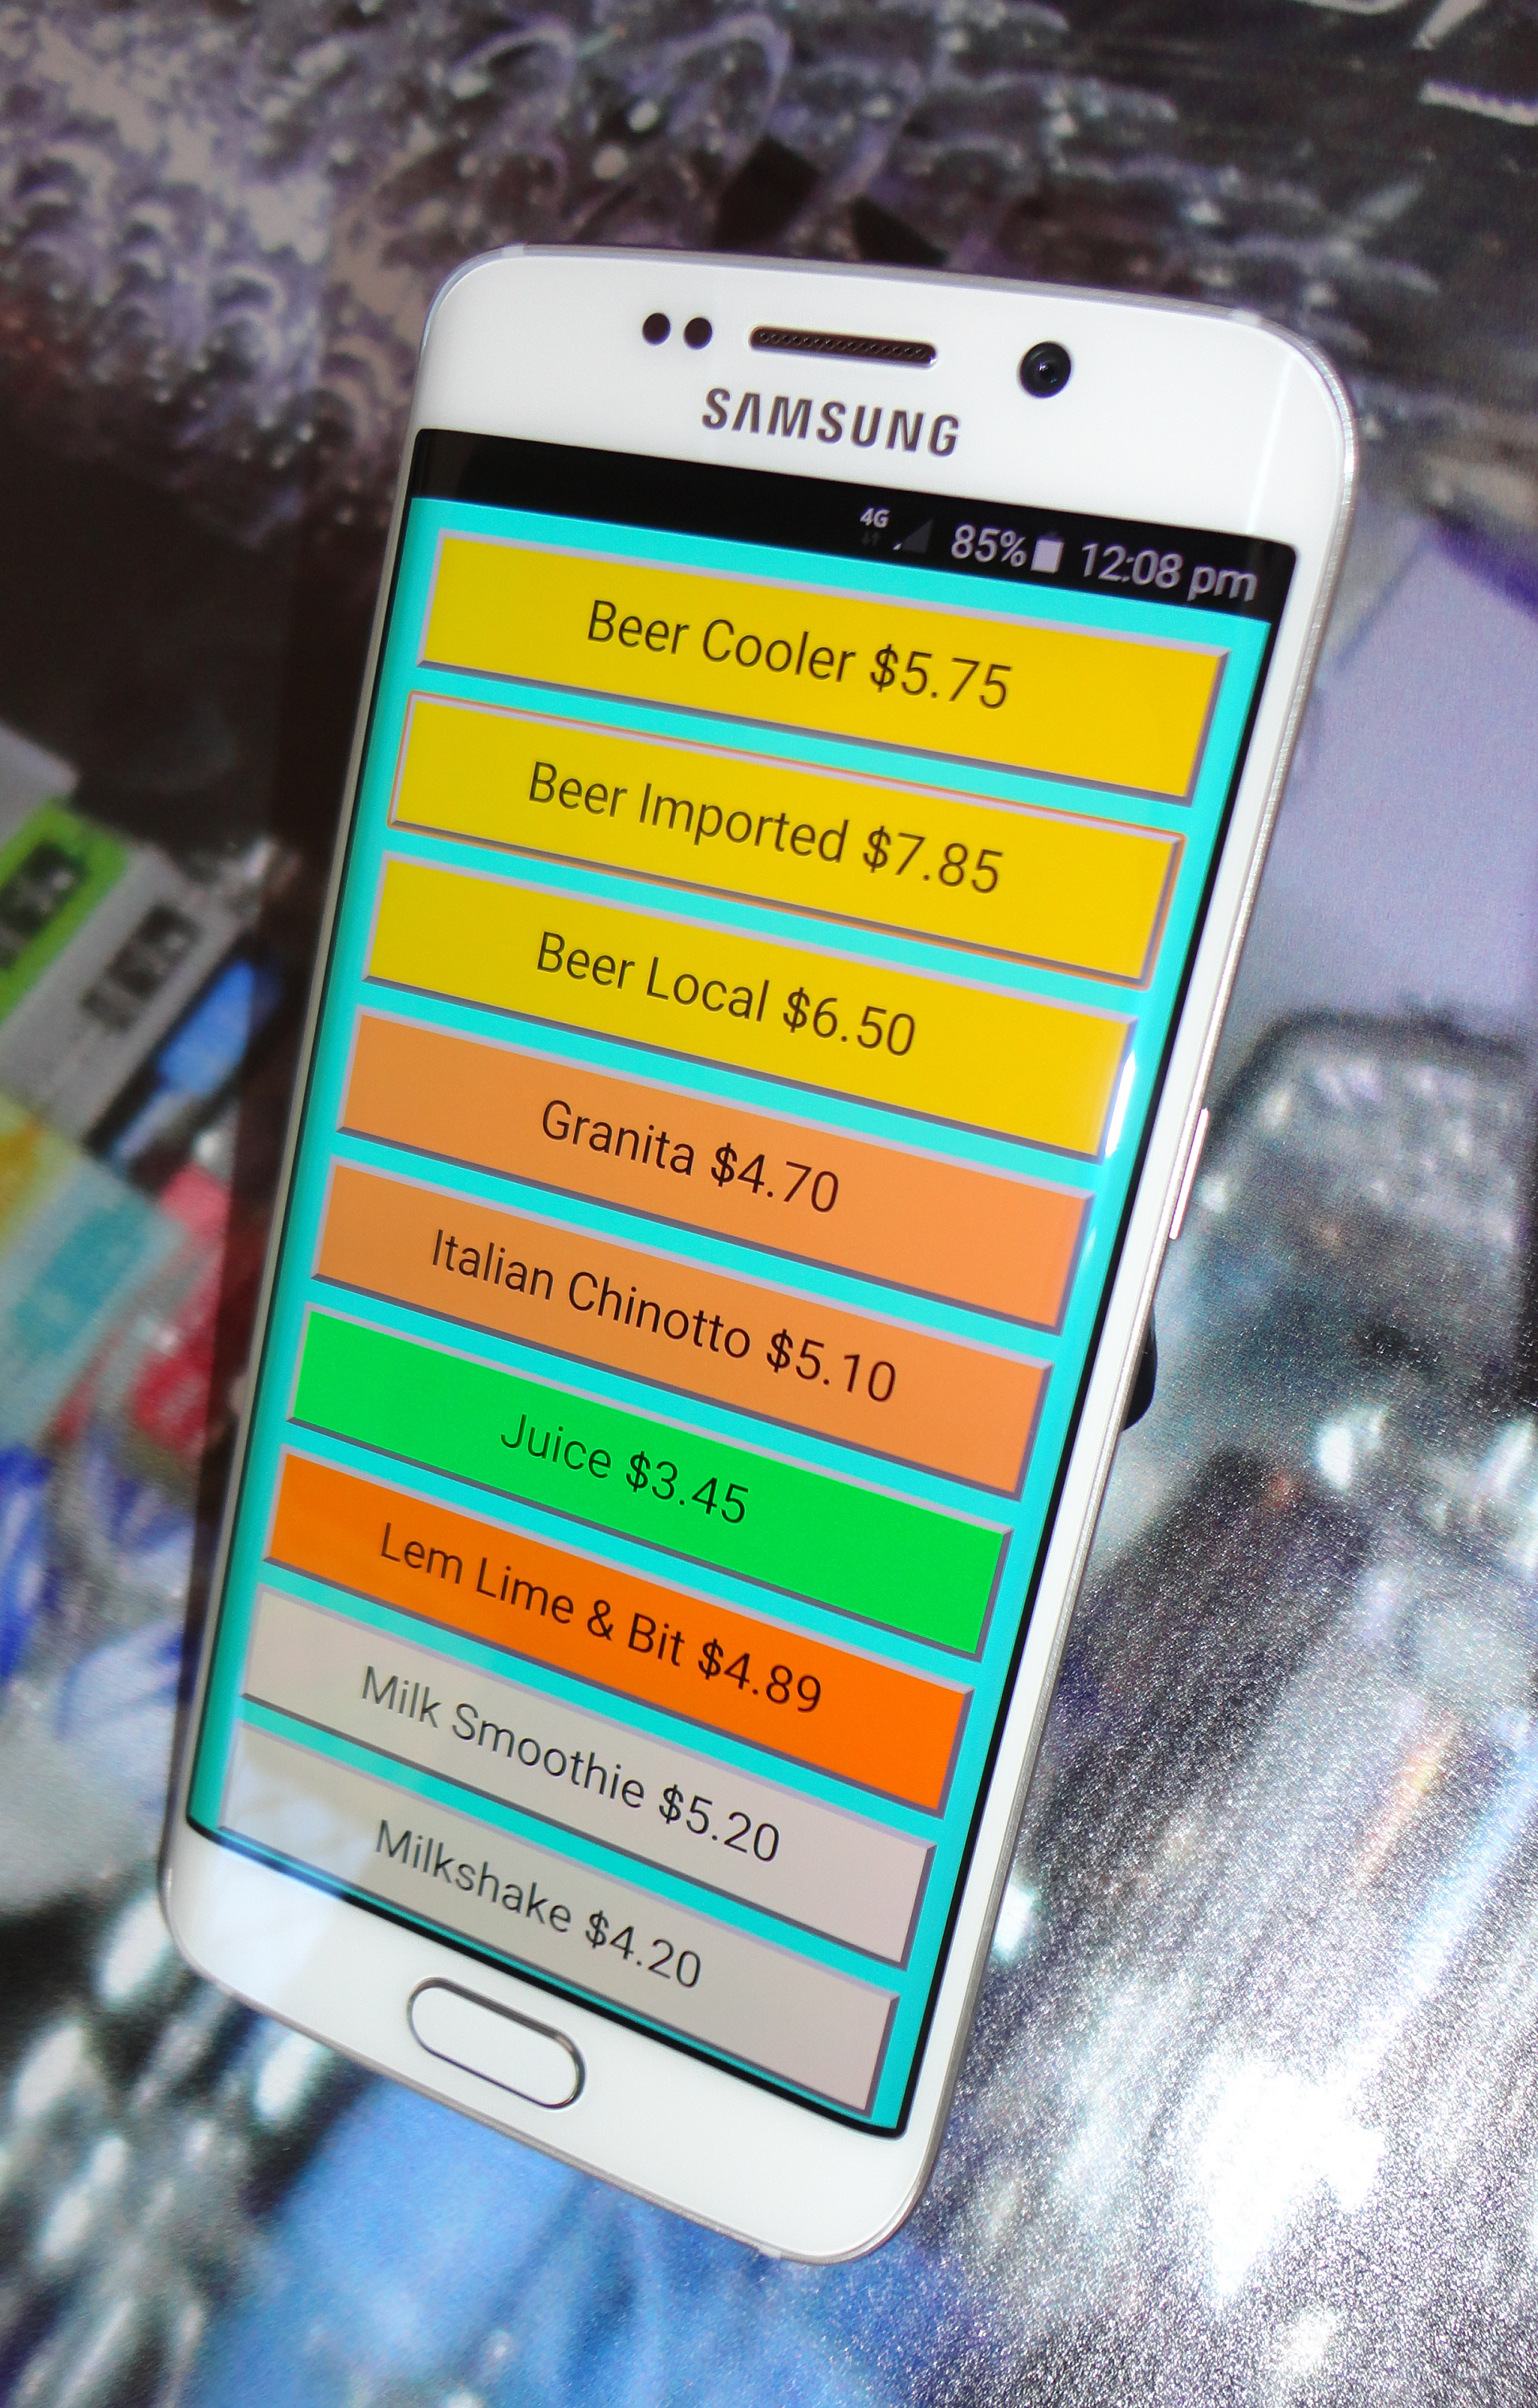 Android application Restaurant / Cafe - POS & Kitchen Display System screenshort